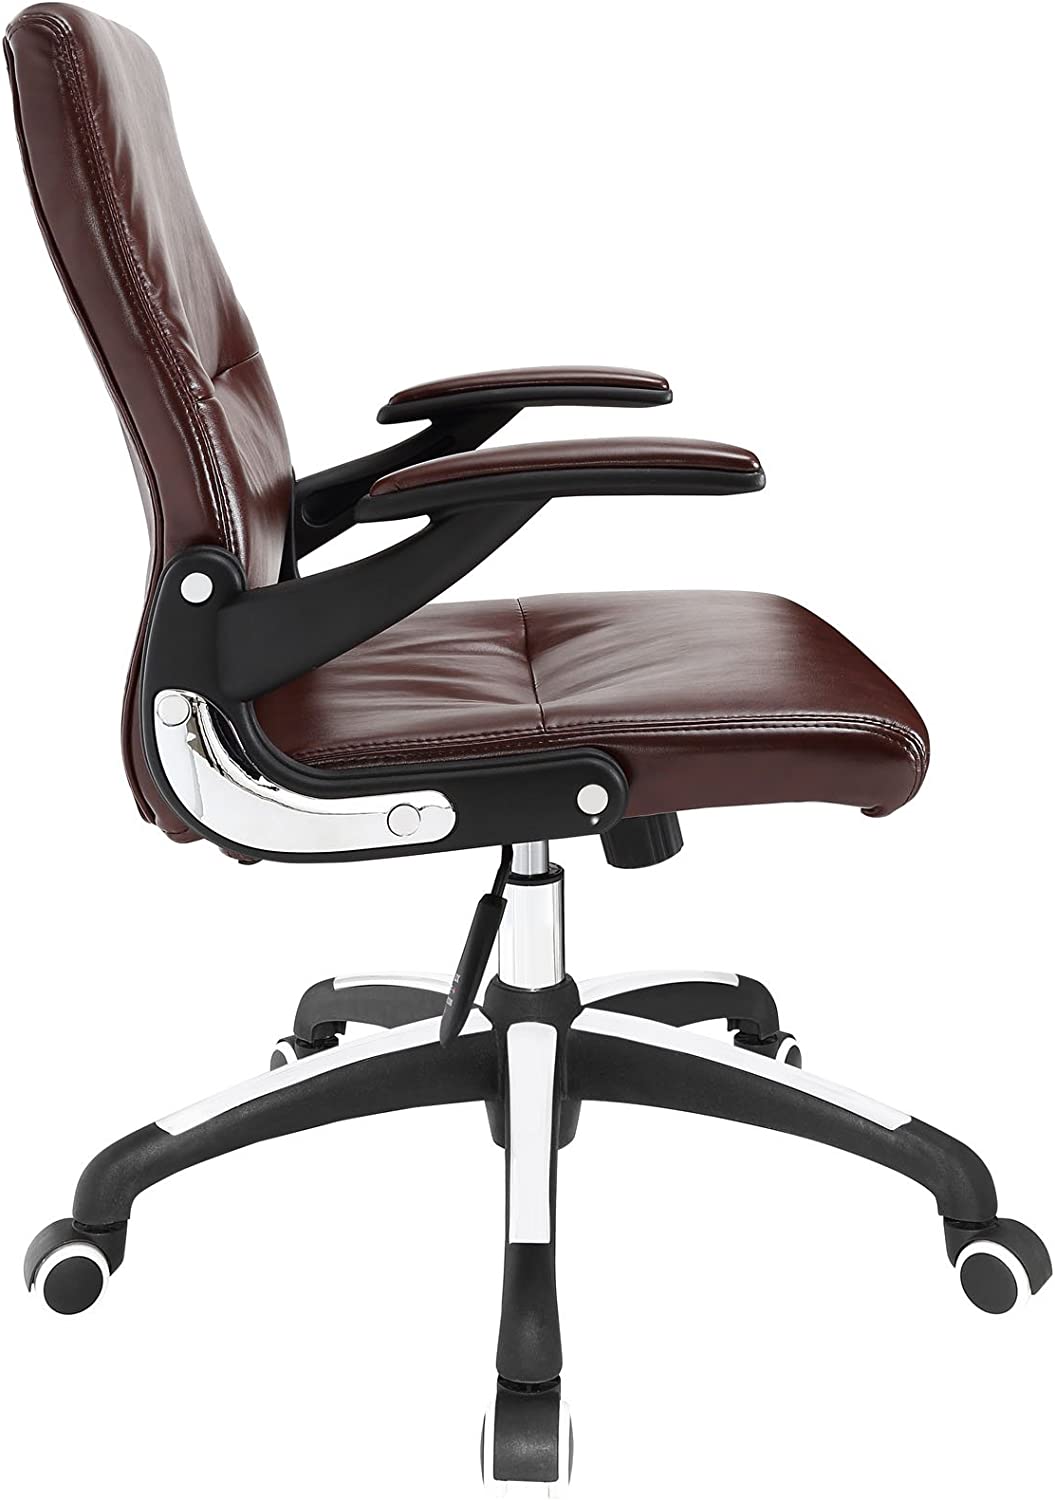 Modway Premier Highback Office Chair in Brown